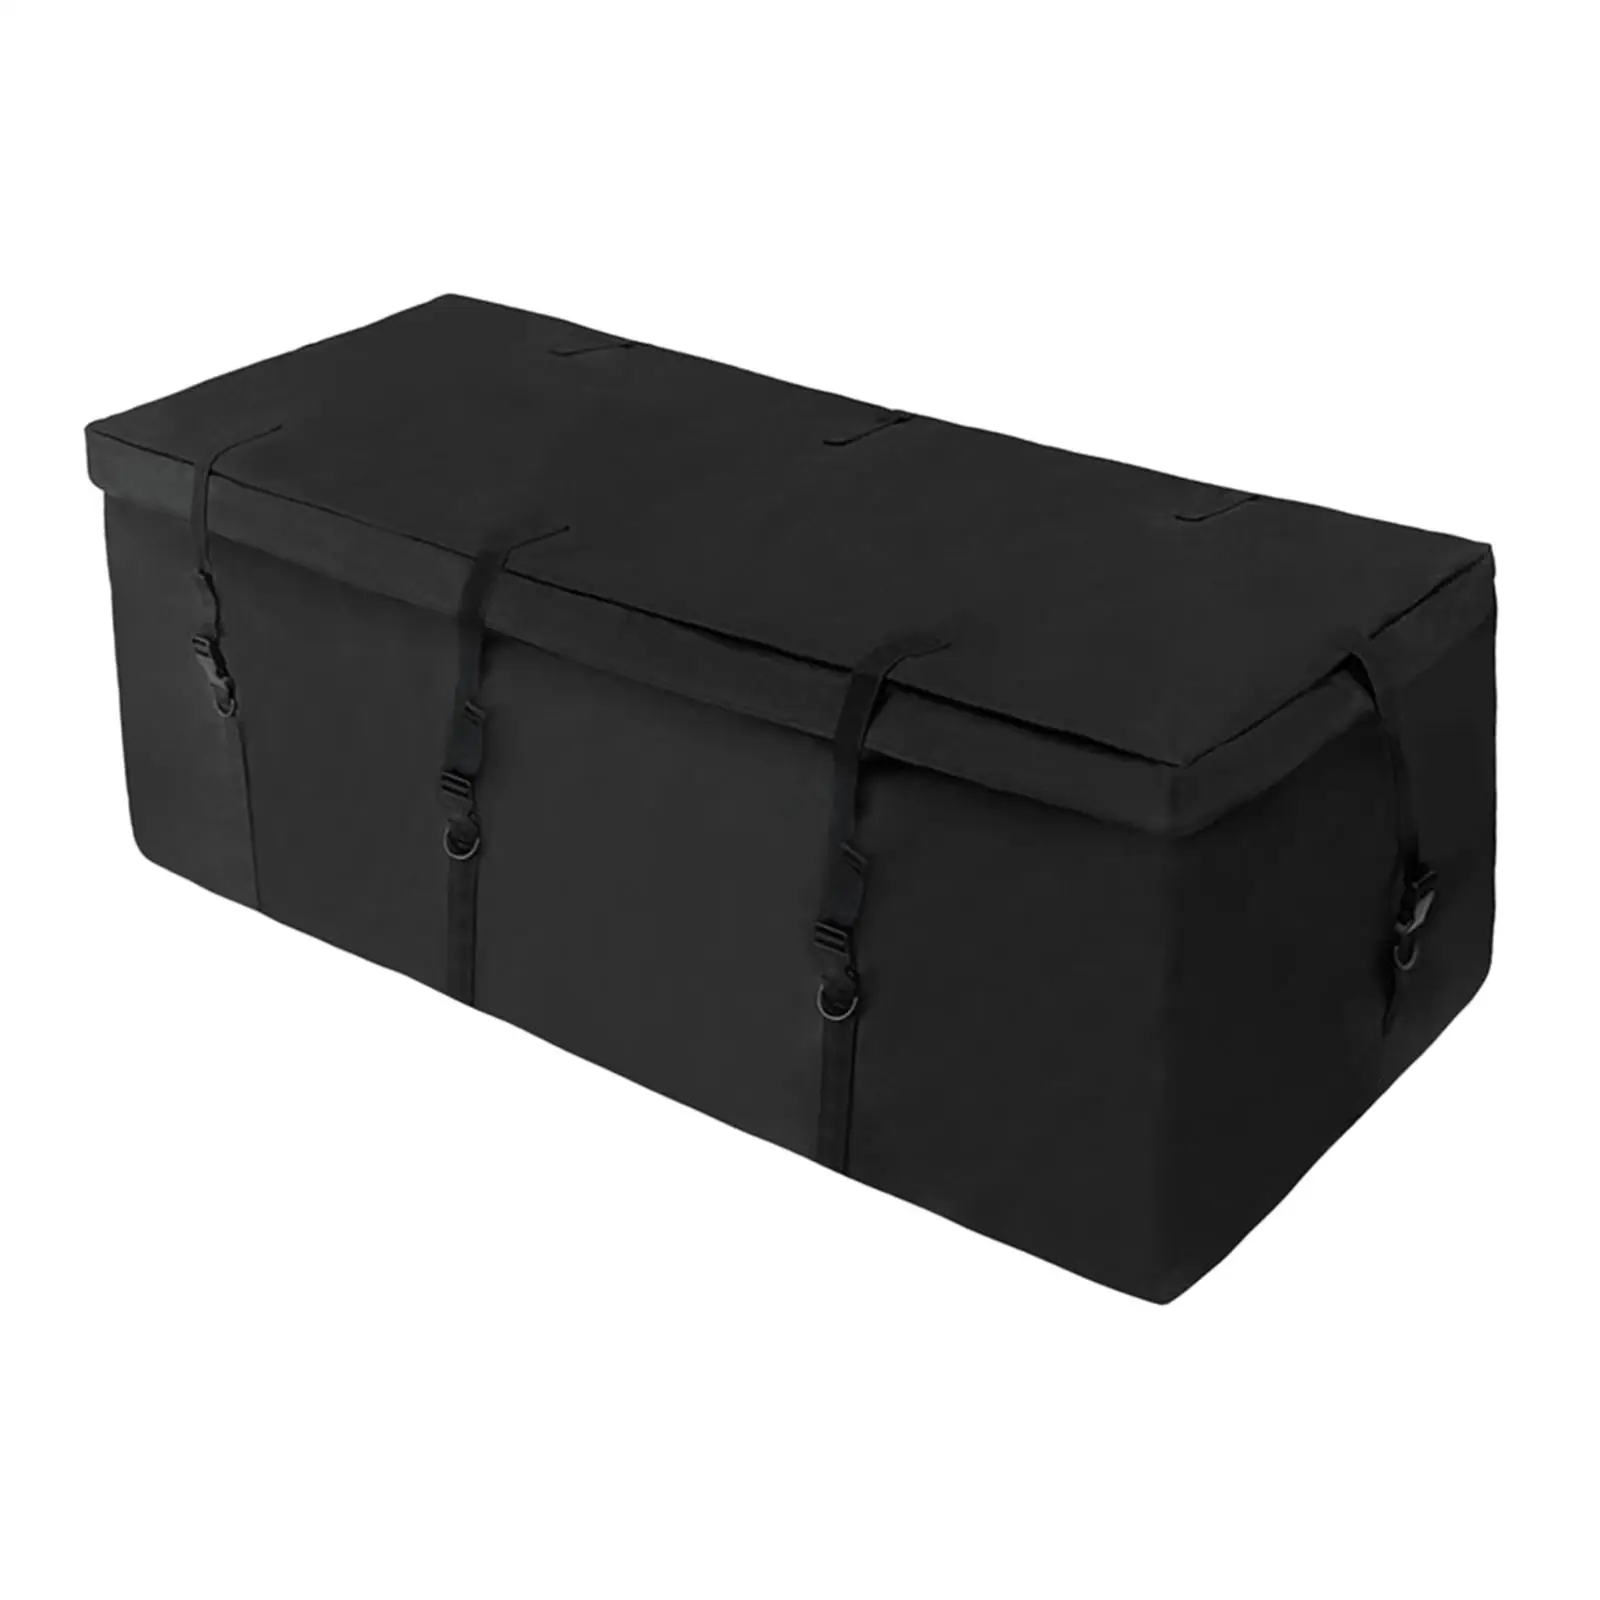 Hitch Cargo Carrier Bag Heavy Duty Black Luggage Storage Rooftop Cargo Carrier Bag for All Vehicle Travel SUV Car Trailer